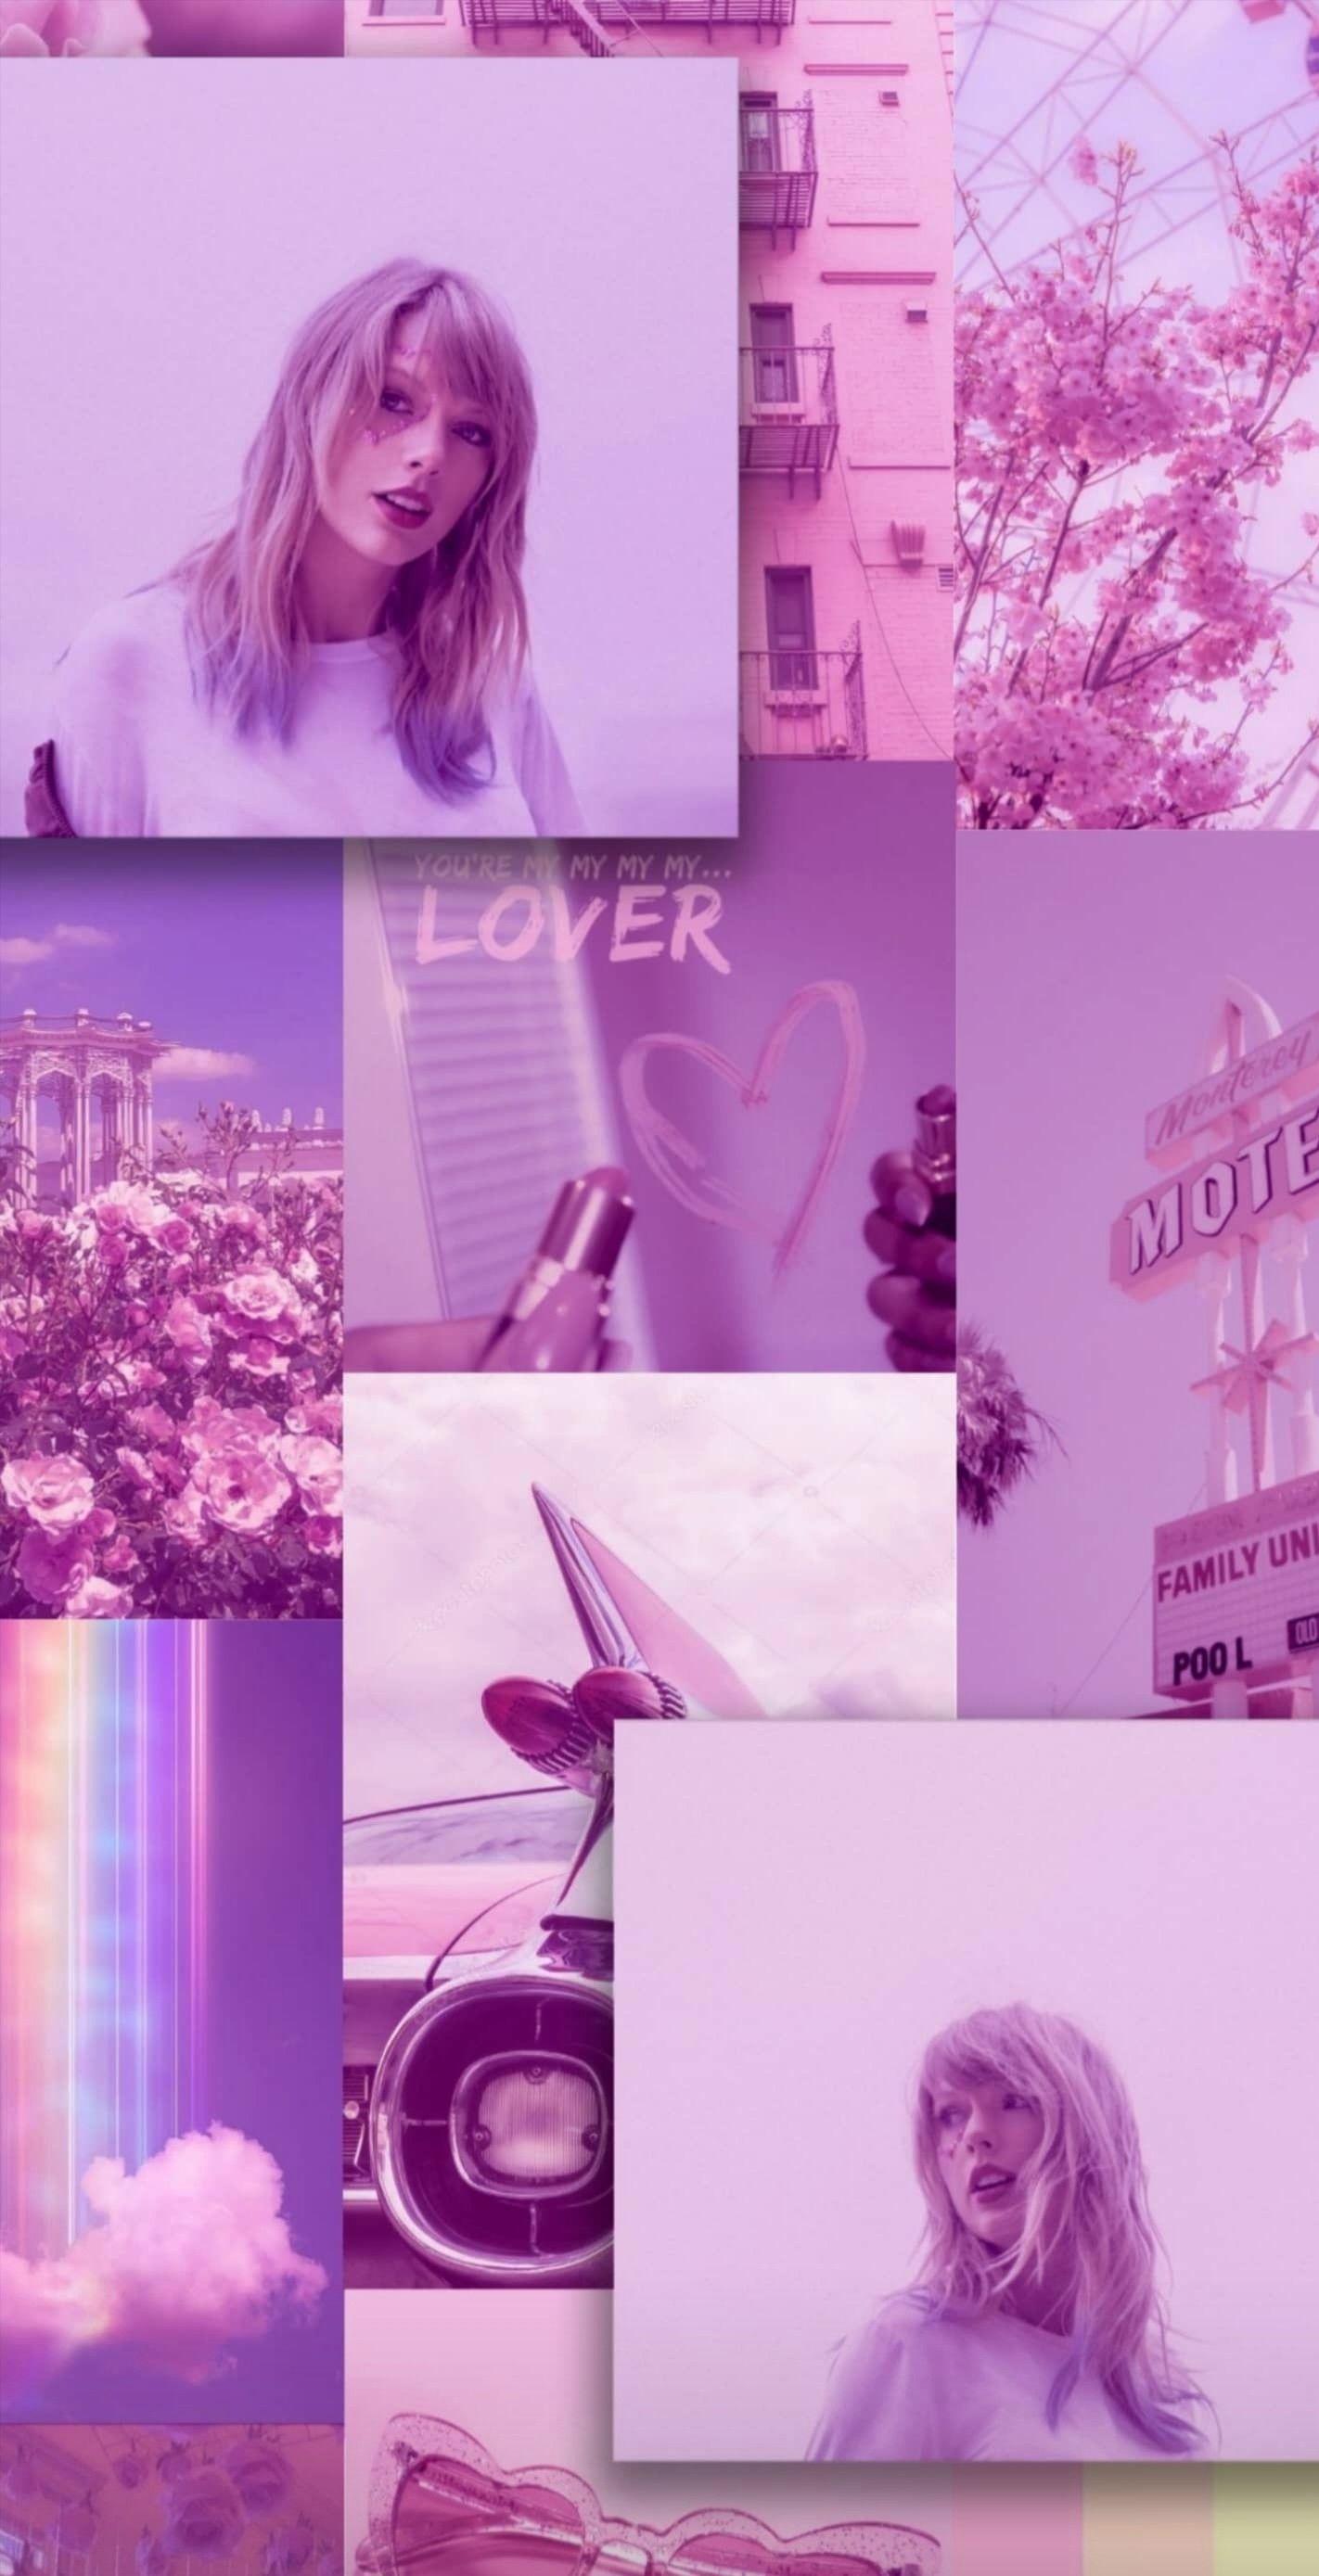 Aesthetic taylor swift wallpaper phone background in 2020 - Taylor Swift